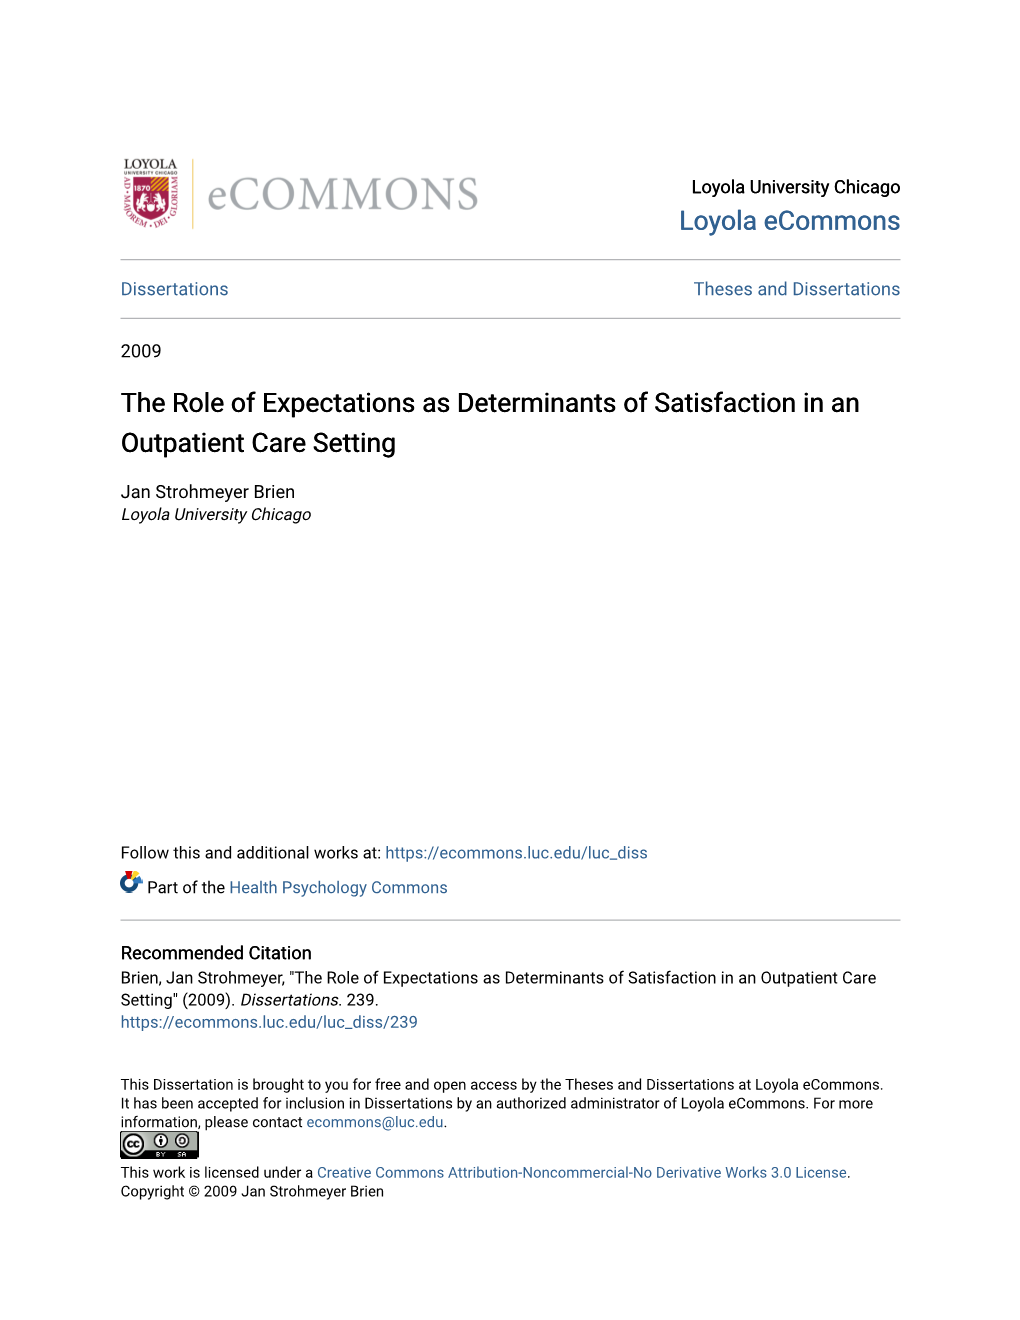 The Role of Expectations As Determinants of Satisfaction in an Outpatient Care Setting